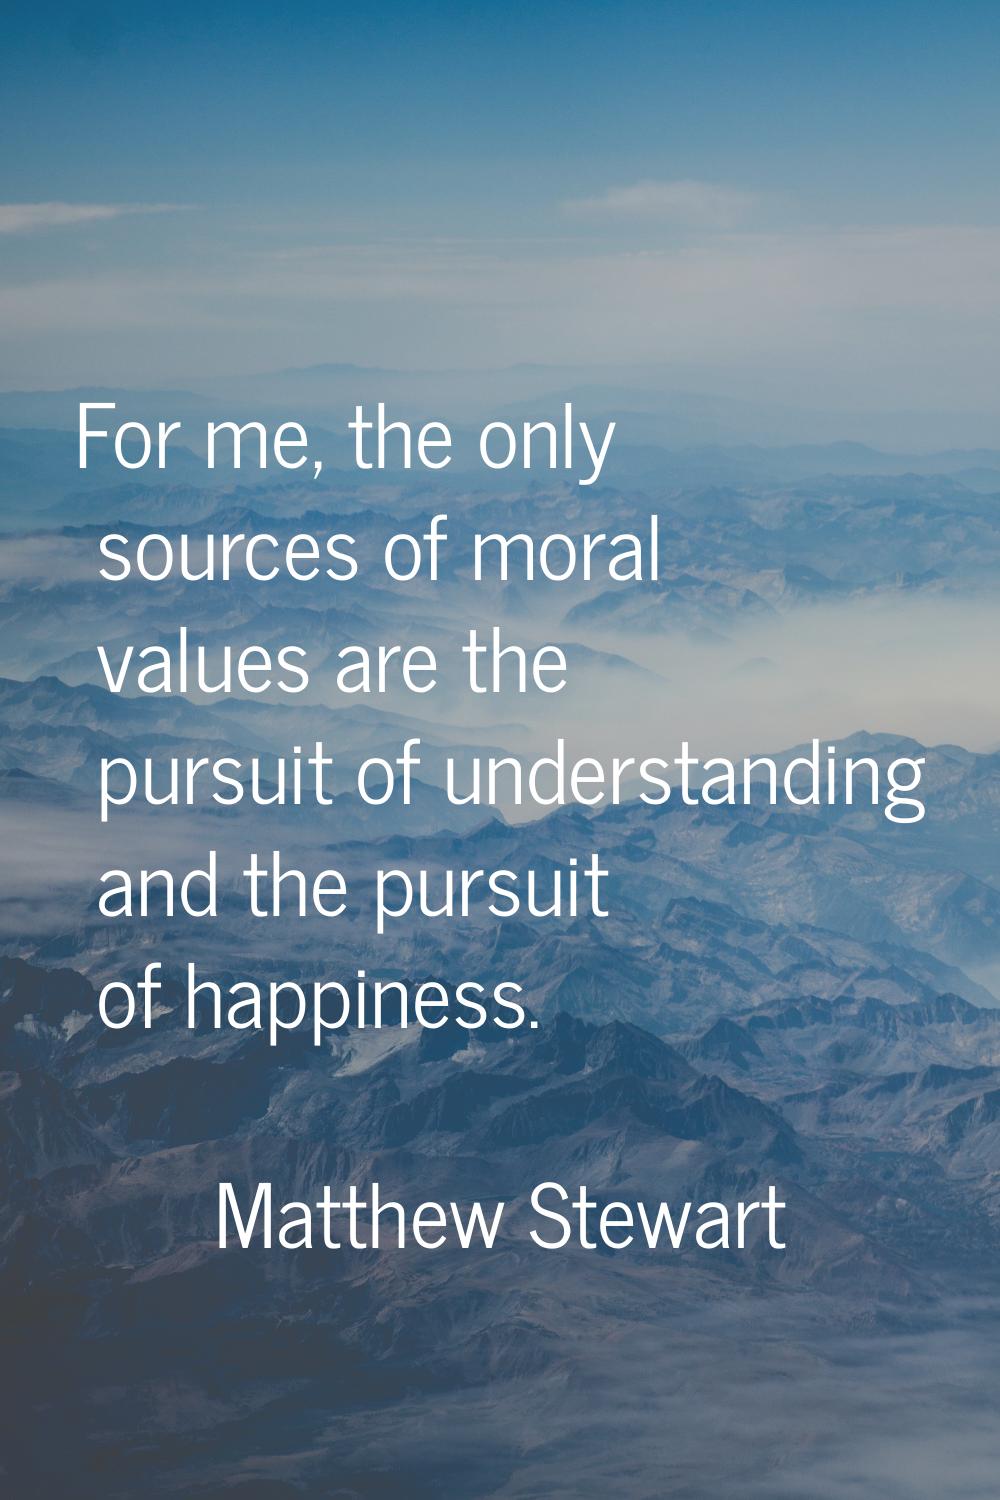 For me, the only sources of moral values are the pursuit of understanding and the pursuit of happin